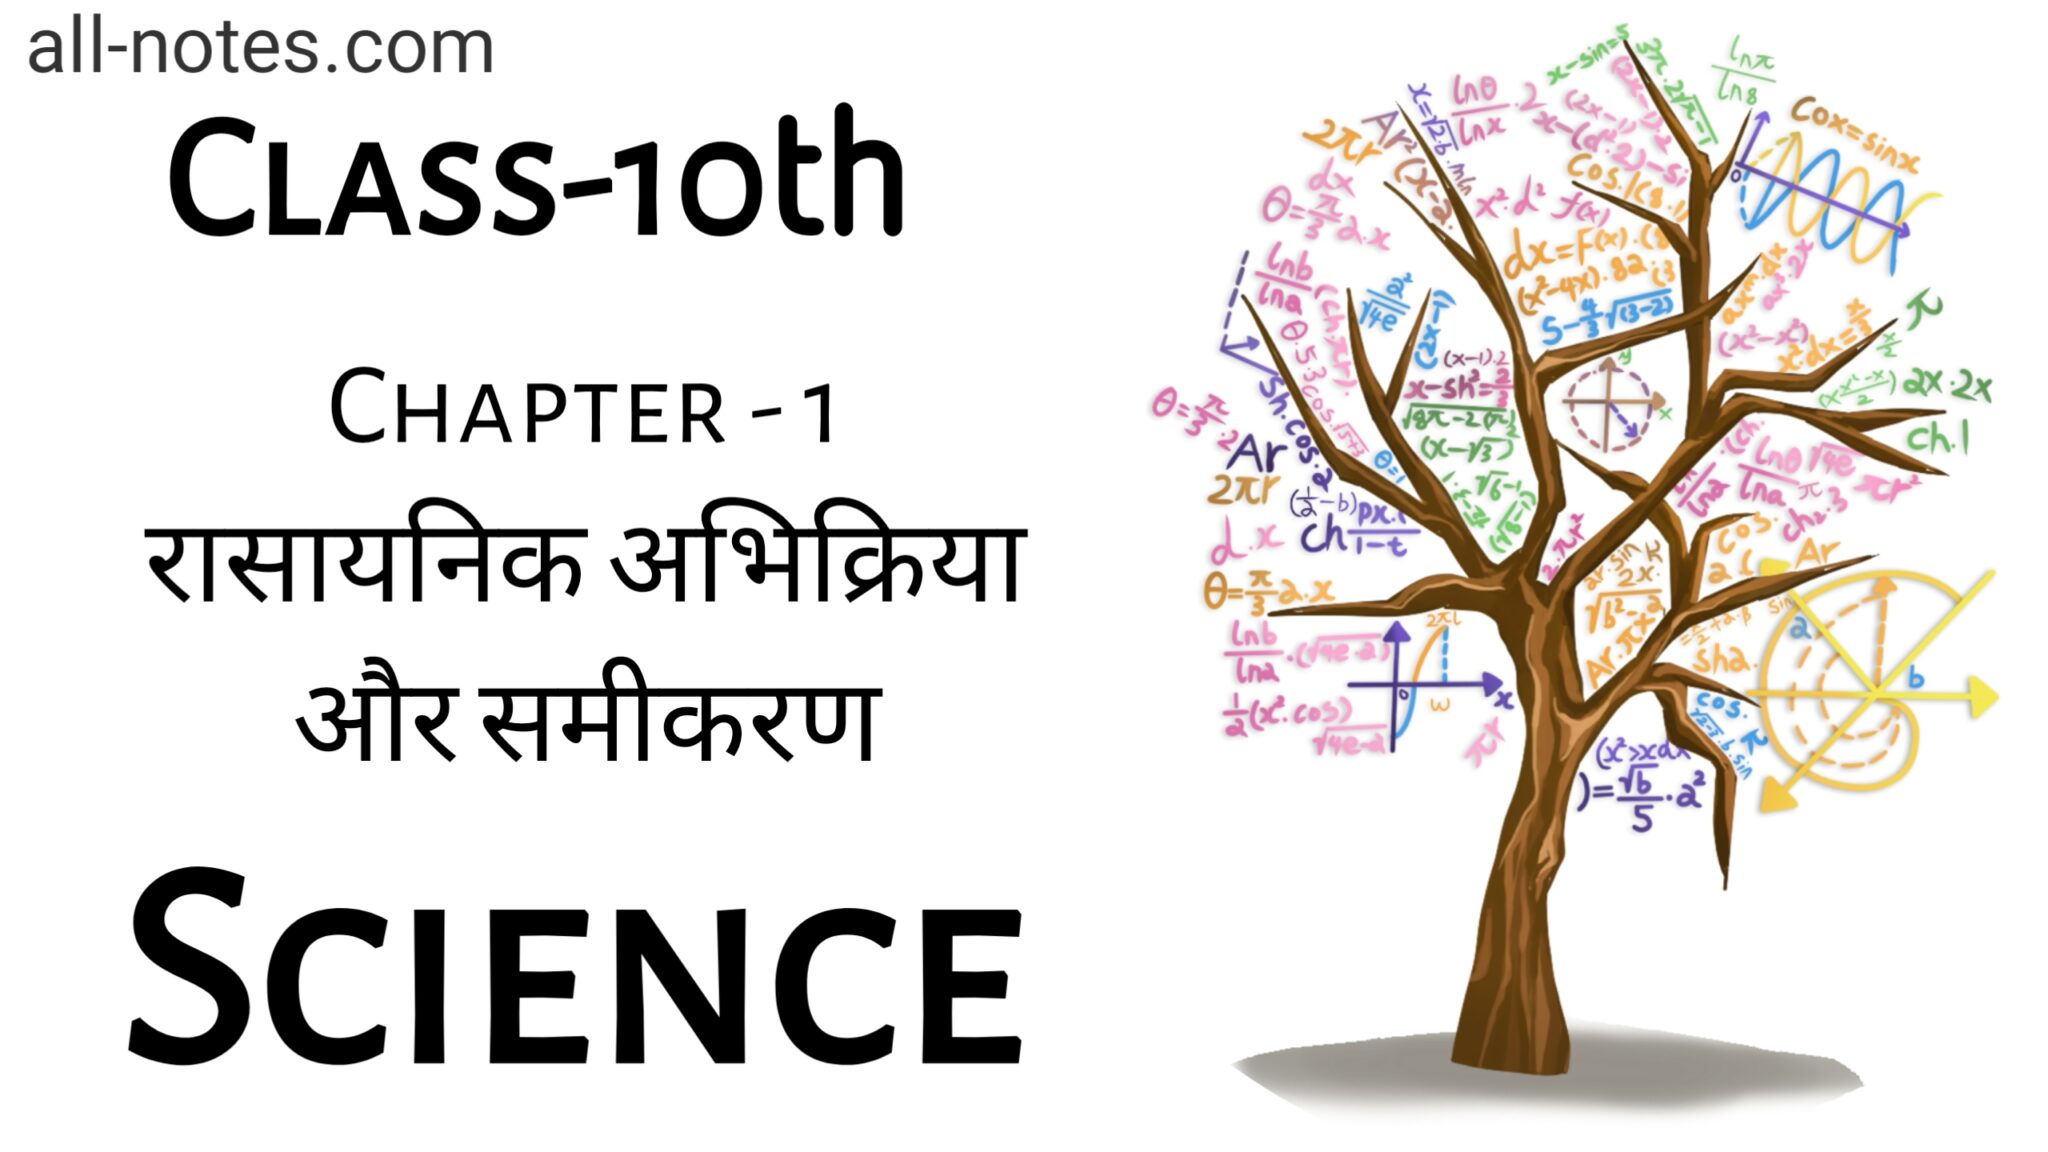 Class 10 Science Chapter 1 Notes in Hindi रासायनिक अभिक्रिया और समीकरण